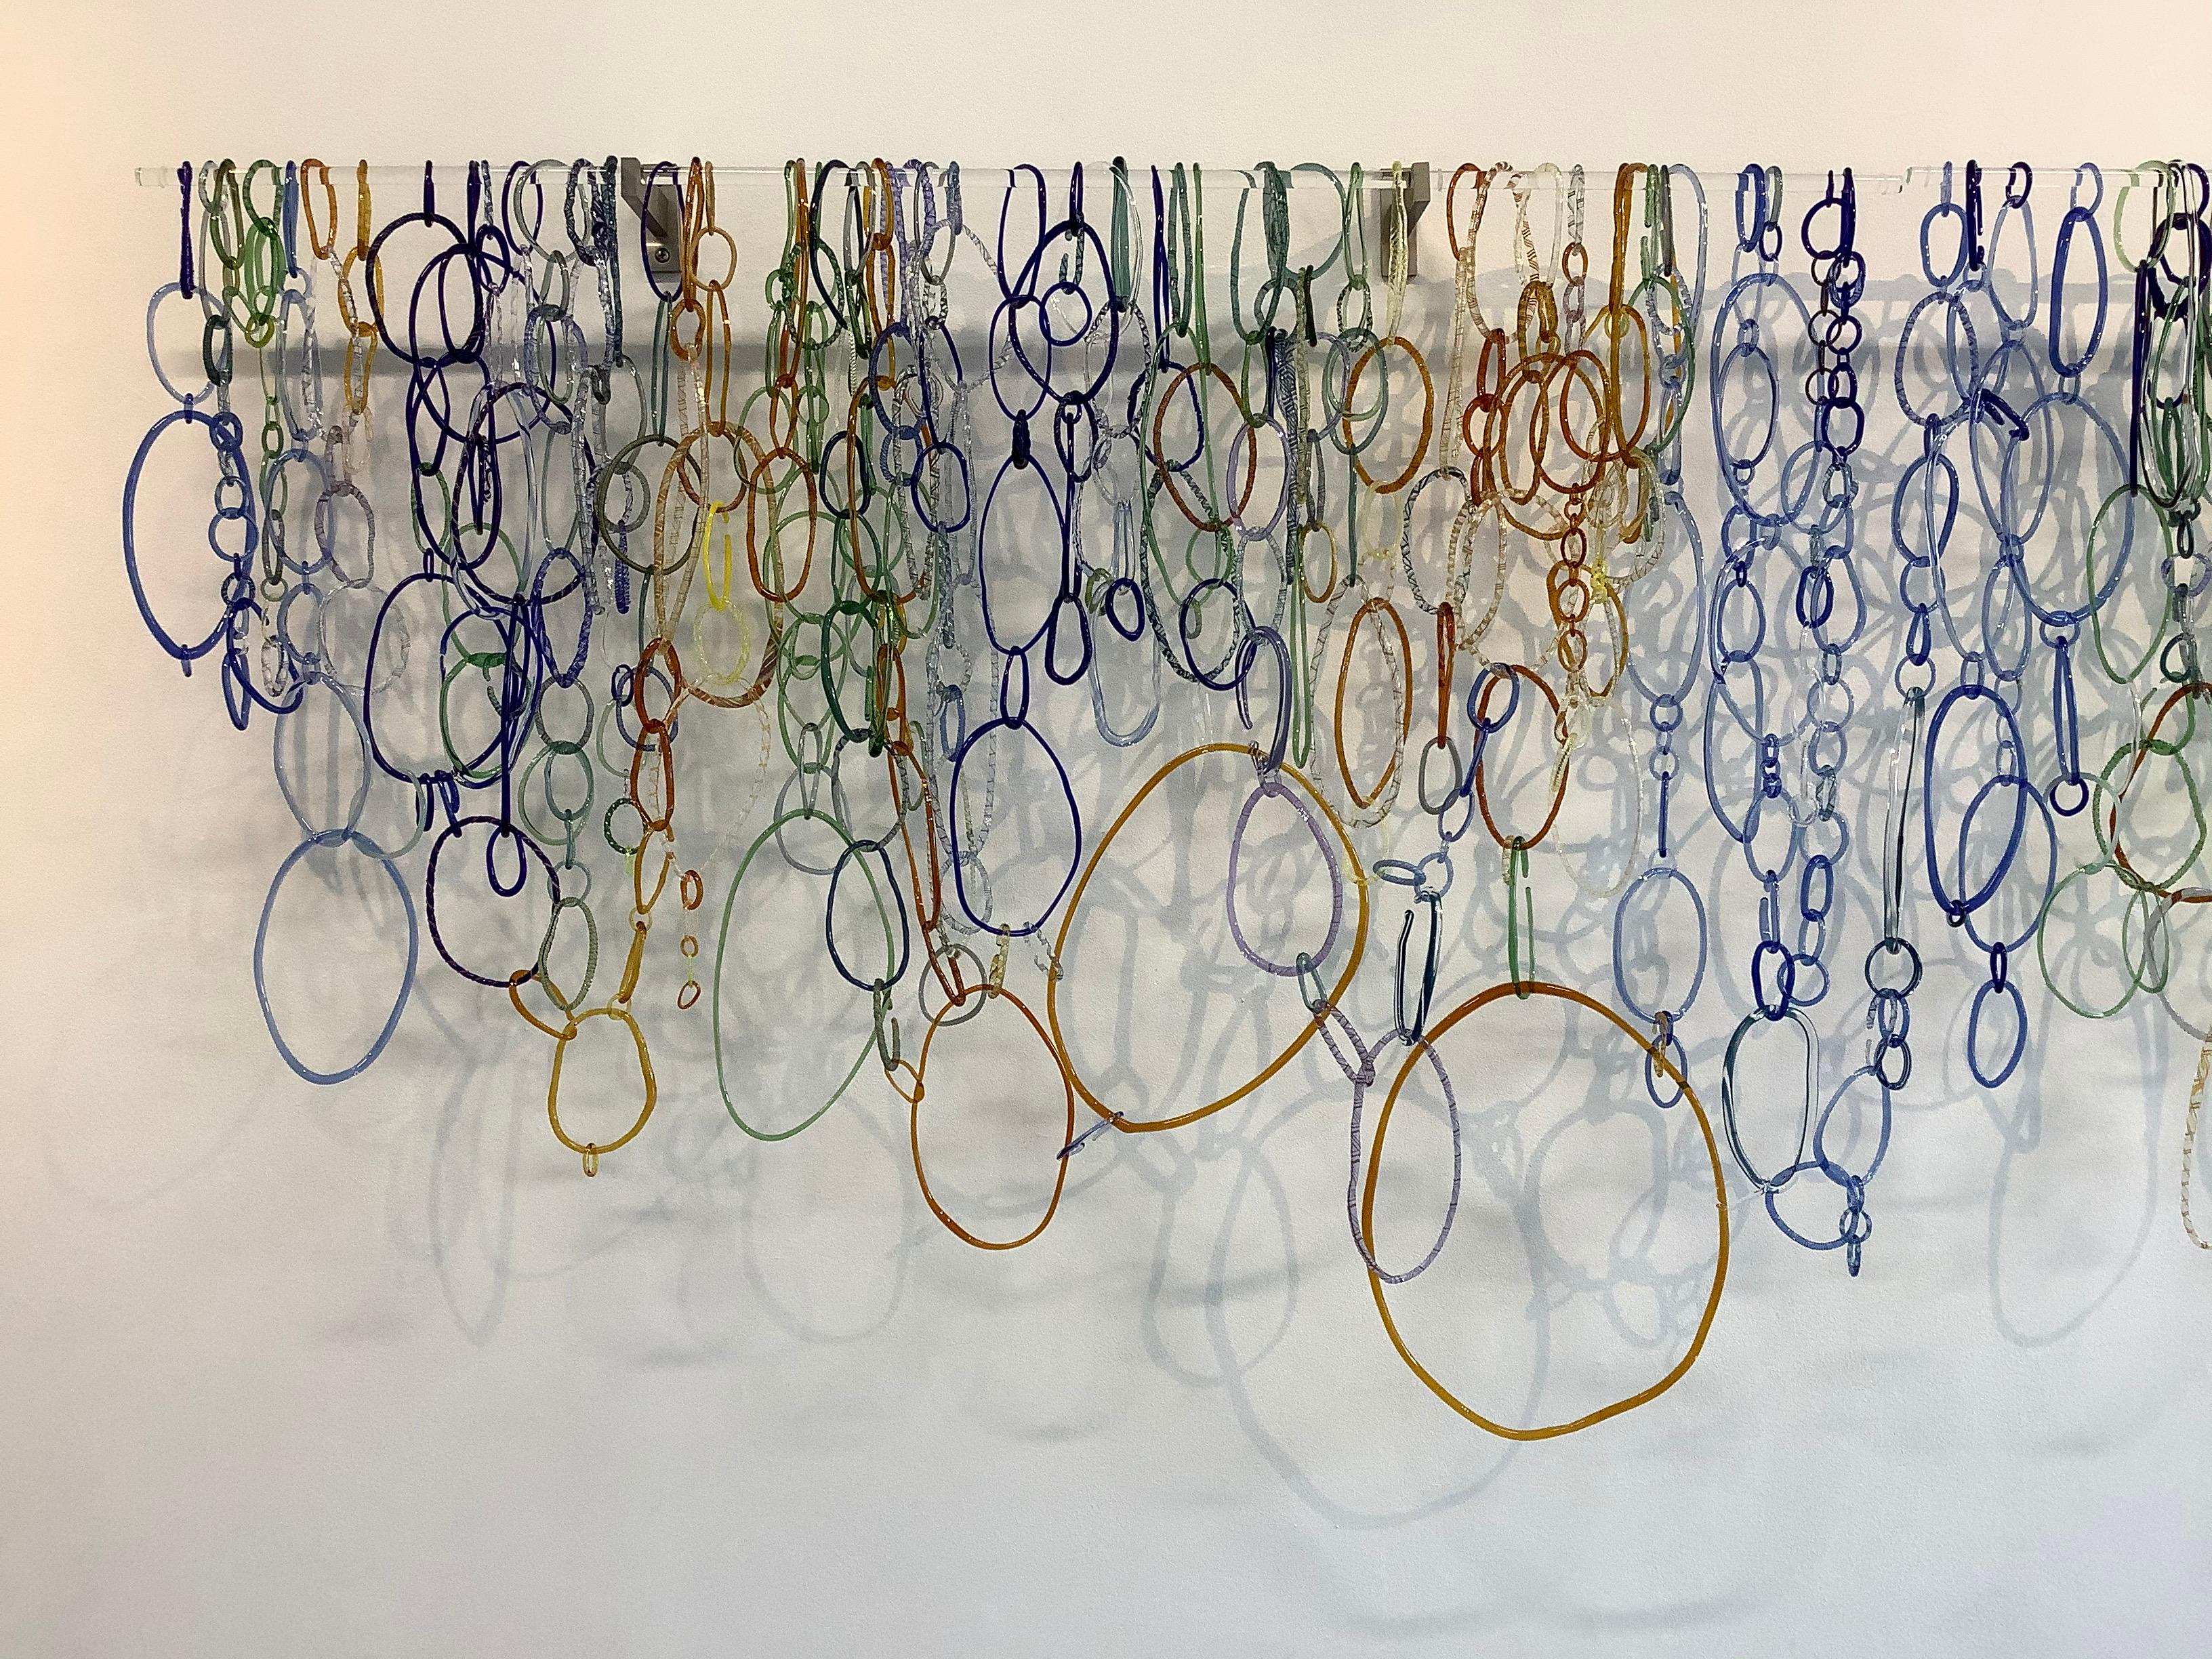 Wide horizontal hanging sculpture composed of freeform circular loops in various shapes and textures of cobalt blue, golden orange, green, pale blue and teal torch worked borosilicate glass, linked together and hanging from two long clear glass rods